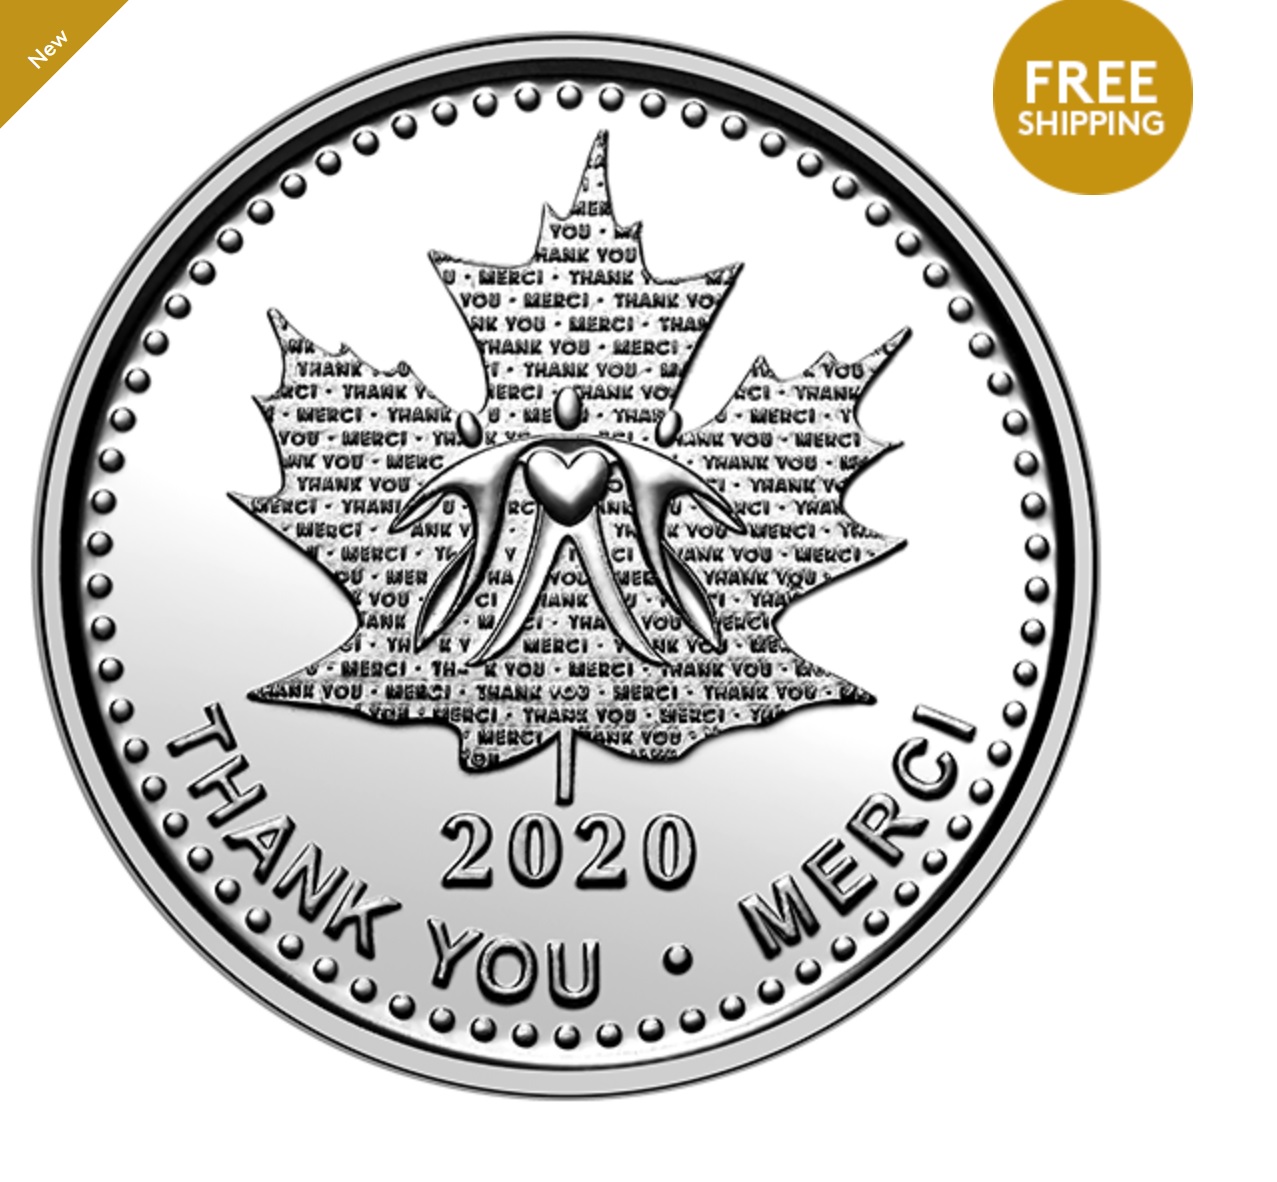 new royal canadian mint coin